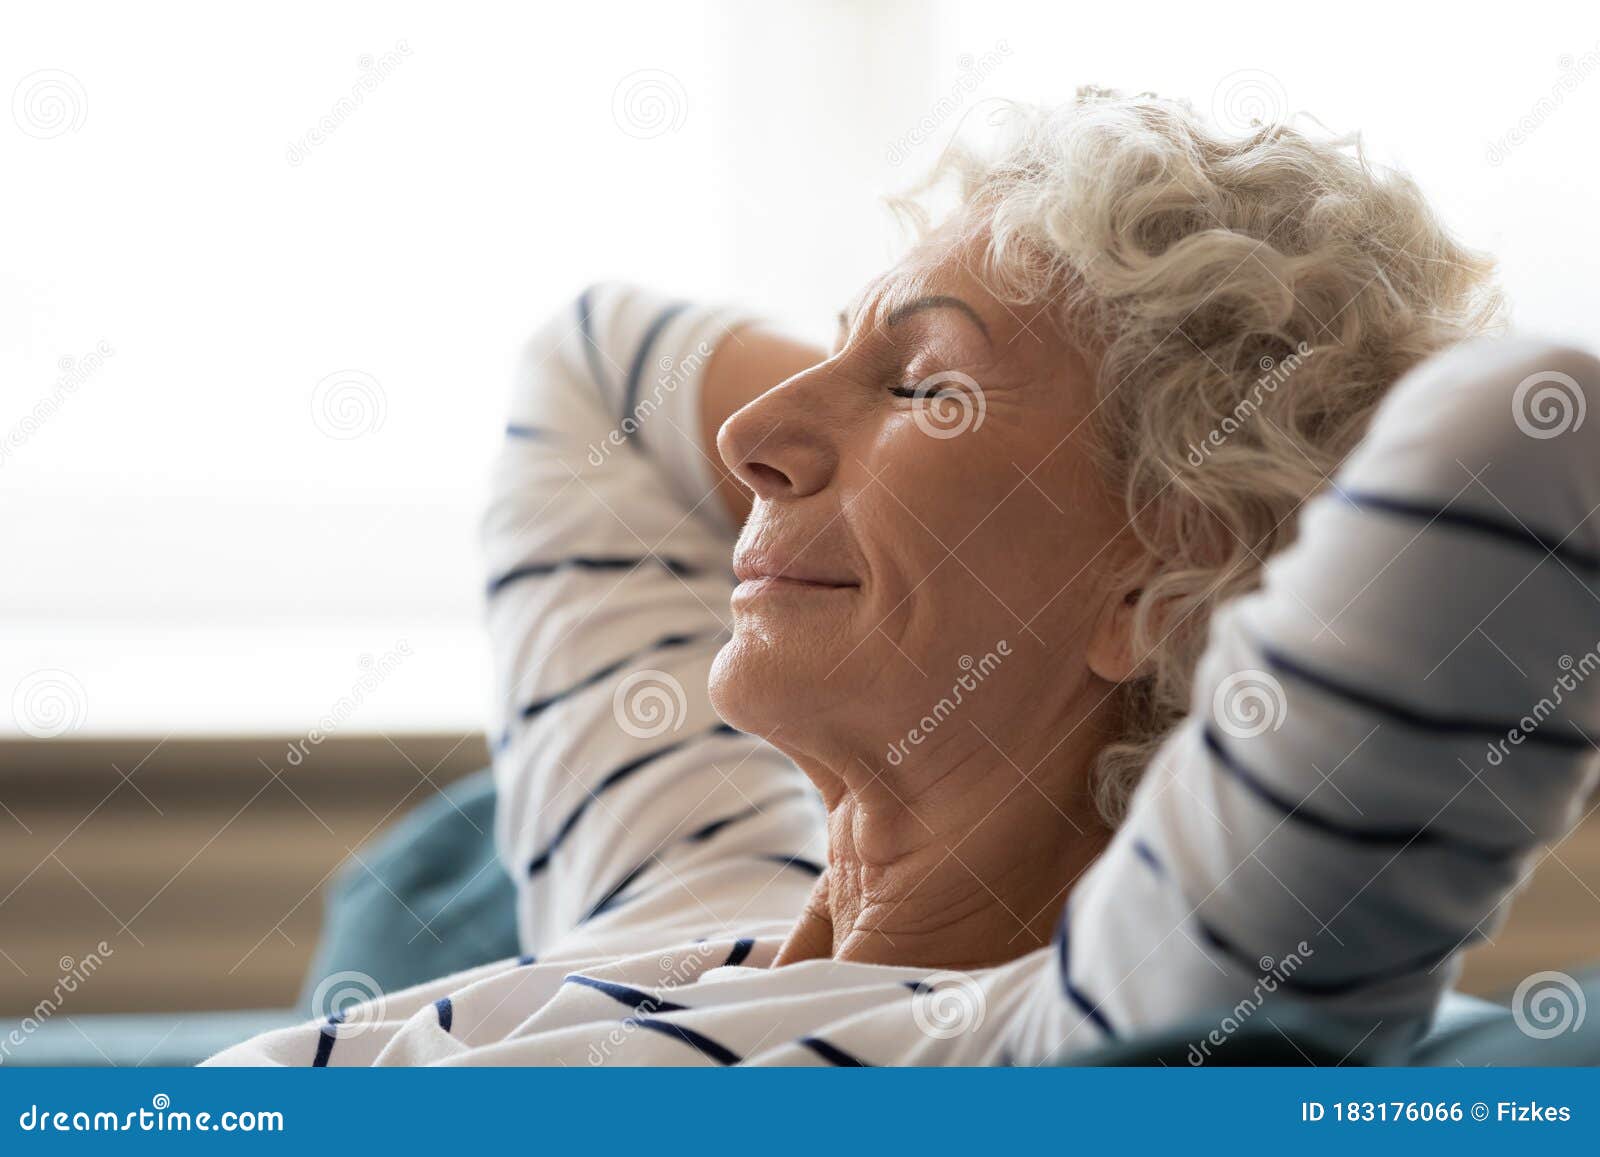 peaceful mindful mature senior grandmother daydreaming at home.